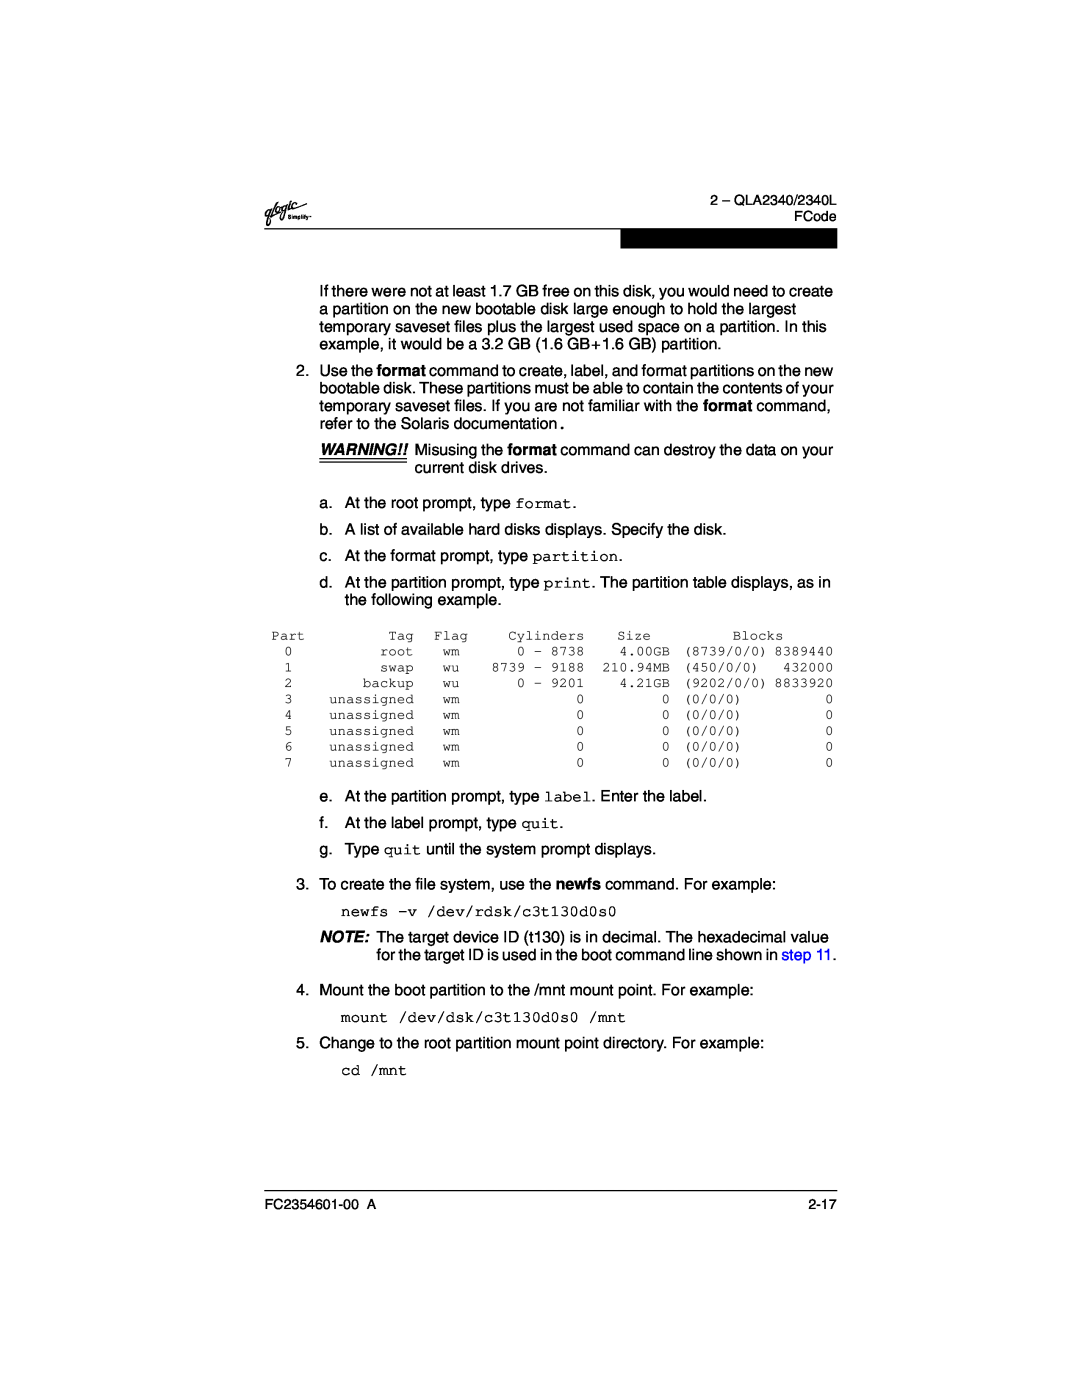 Q-Logic 2300 manual a. At the root prompt, type format 